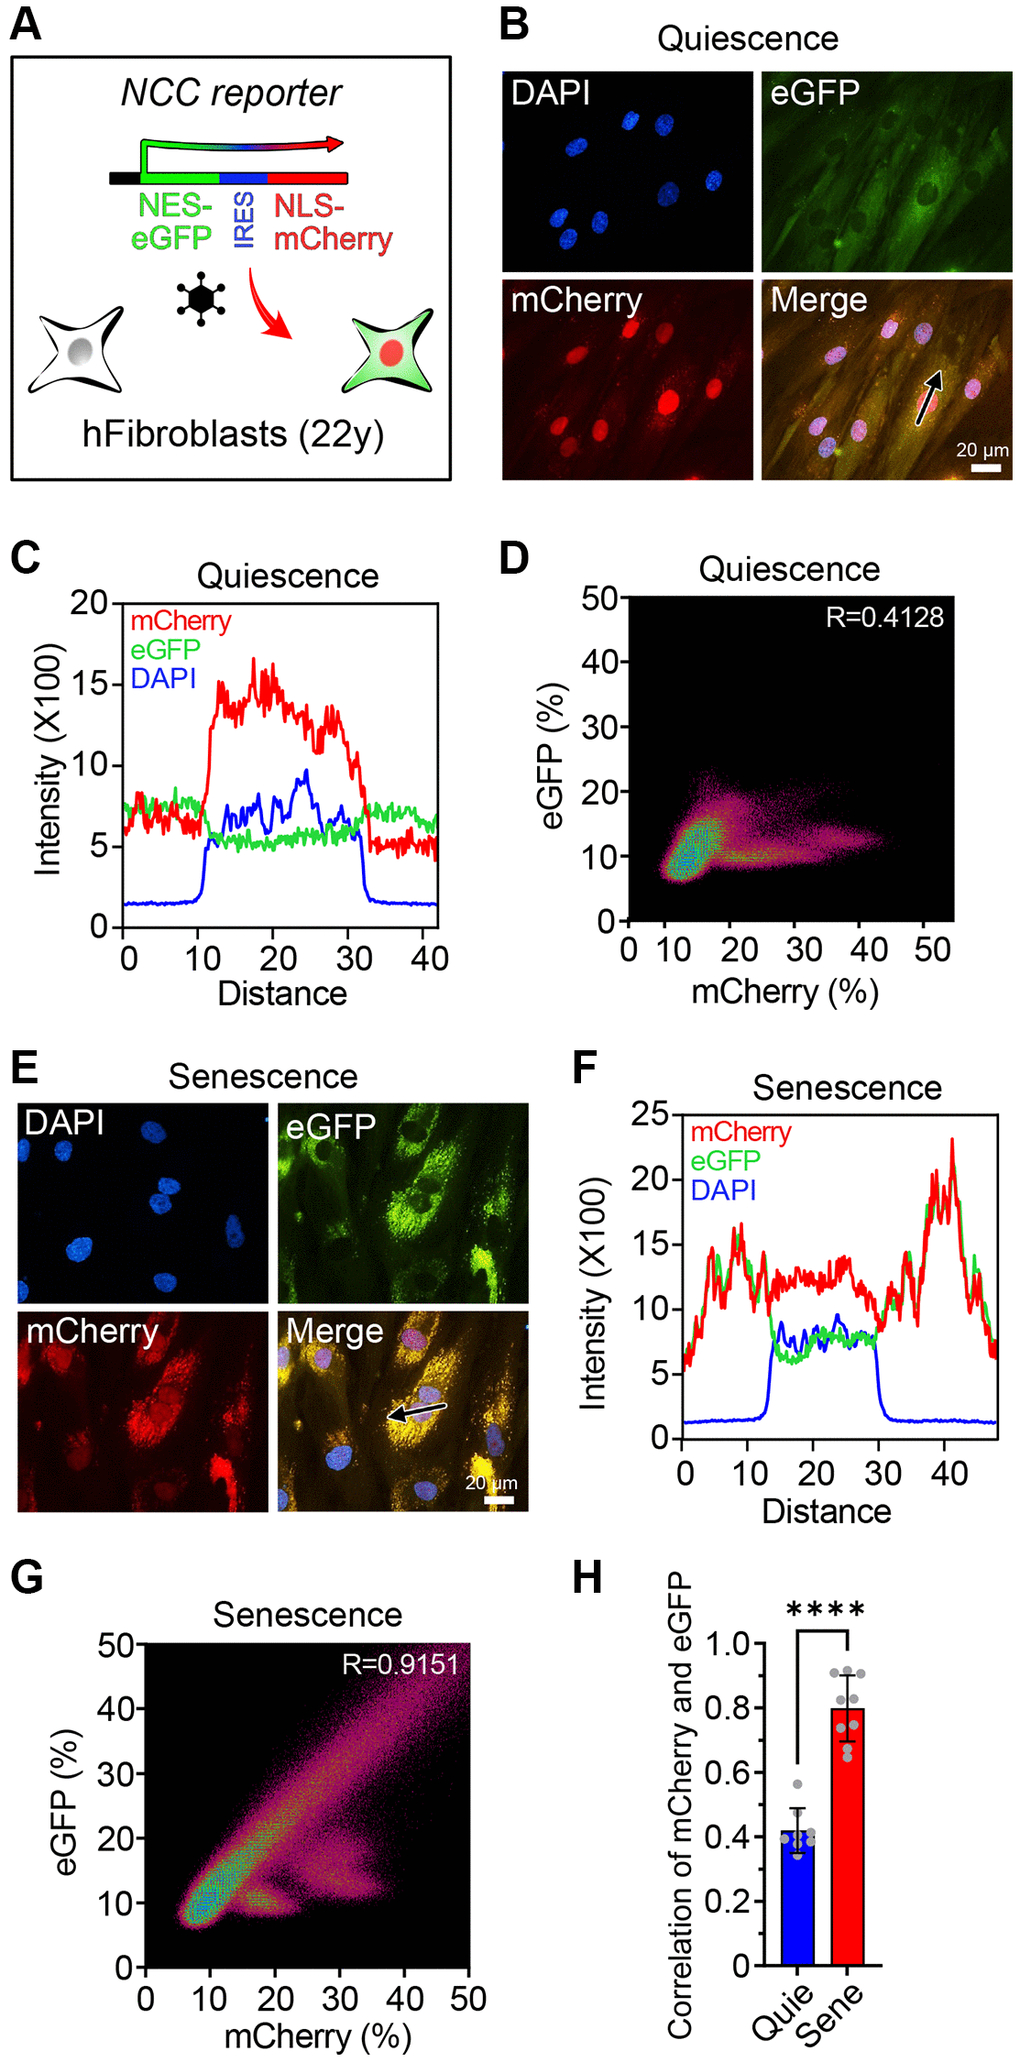 The NCC reporter system to monitor cellular senescence. (A) The NCC reporter system integrated in human fibroblasts. (B) NCC signals in quiescent fibroblasts. (C) Fluorescence intensity profiles corresponding to the path of the arrow in (B). (D) The colocalization of mCherry and eGFP signals in quiescent fibroblasts by Pearson correlation. (E) NCC signals in senescent fibroblasts. (F) Fluorescence intensity profiles corresponding to the path of the arrow in (E). (G) The colocalization of mCherry and eGFP signals in senescent fibroblasts by Pearson correlation. (H) Pearson correlation of quiescent and senescent fibroblasts. Data are mean ± SD. ****p t test.